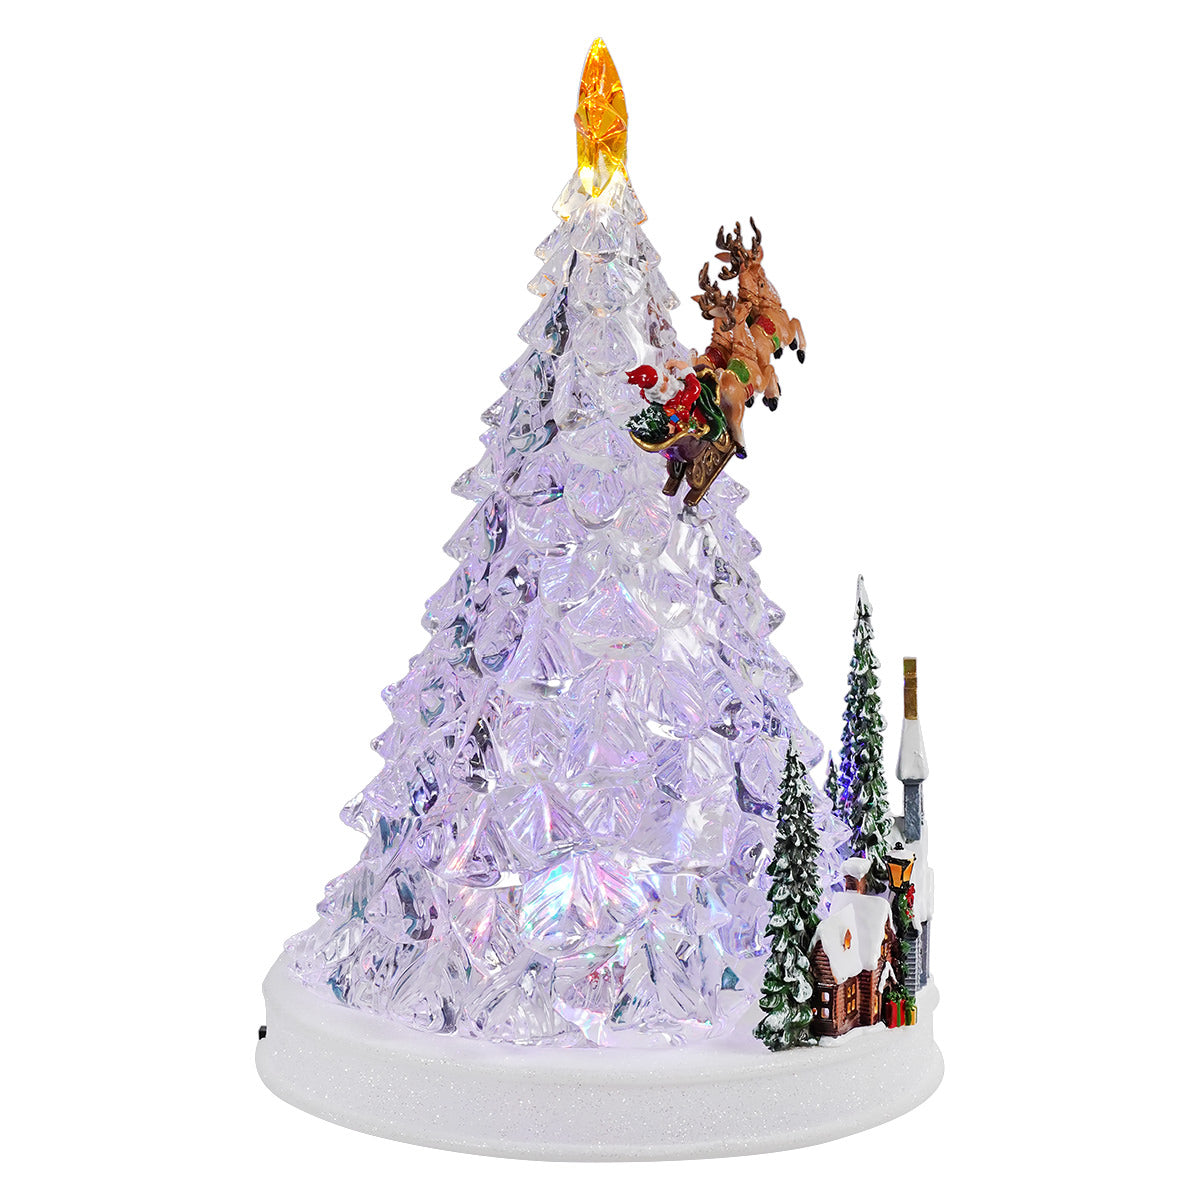 Lighted Musical Christmas Tree Village Scene With Flying Santa